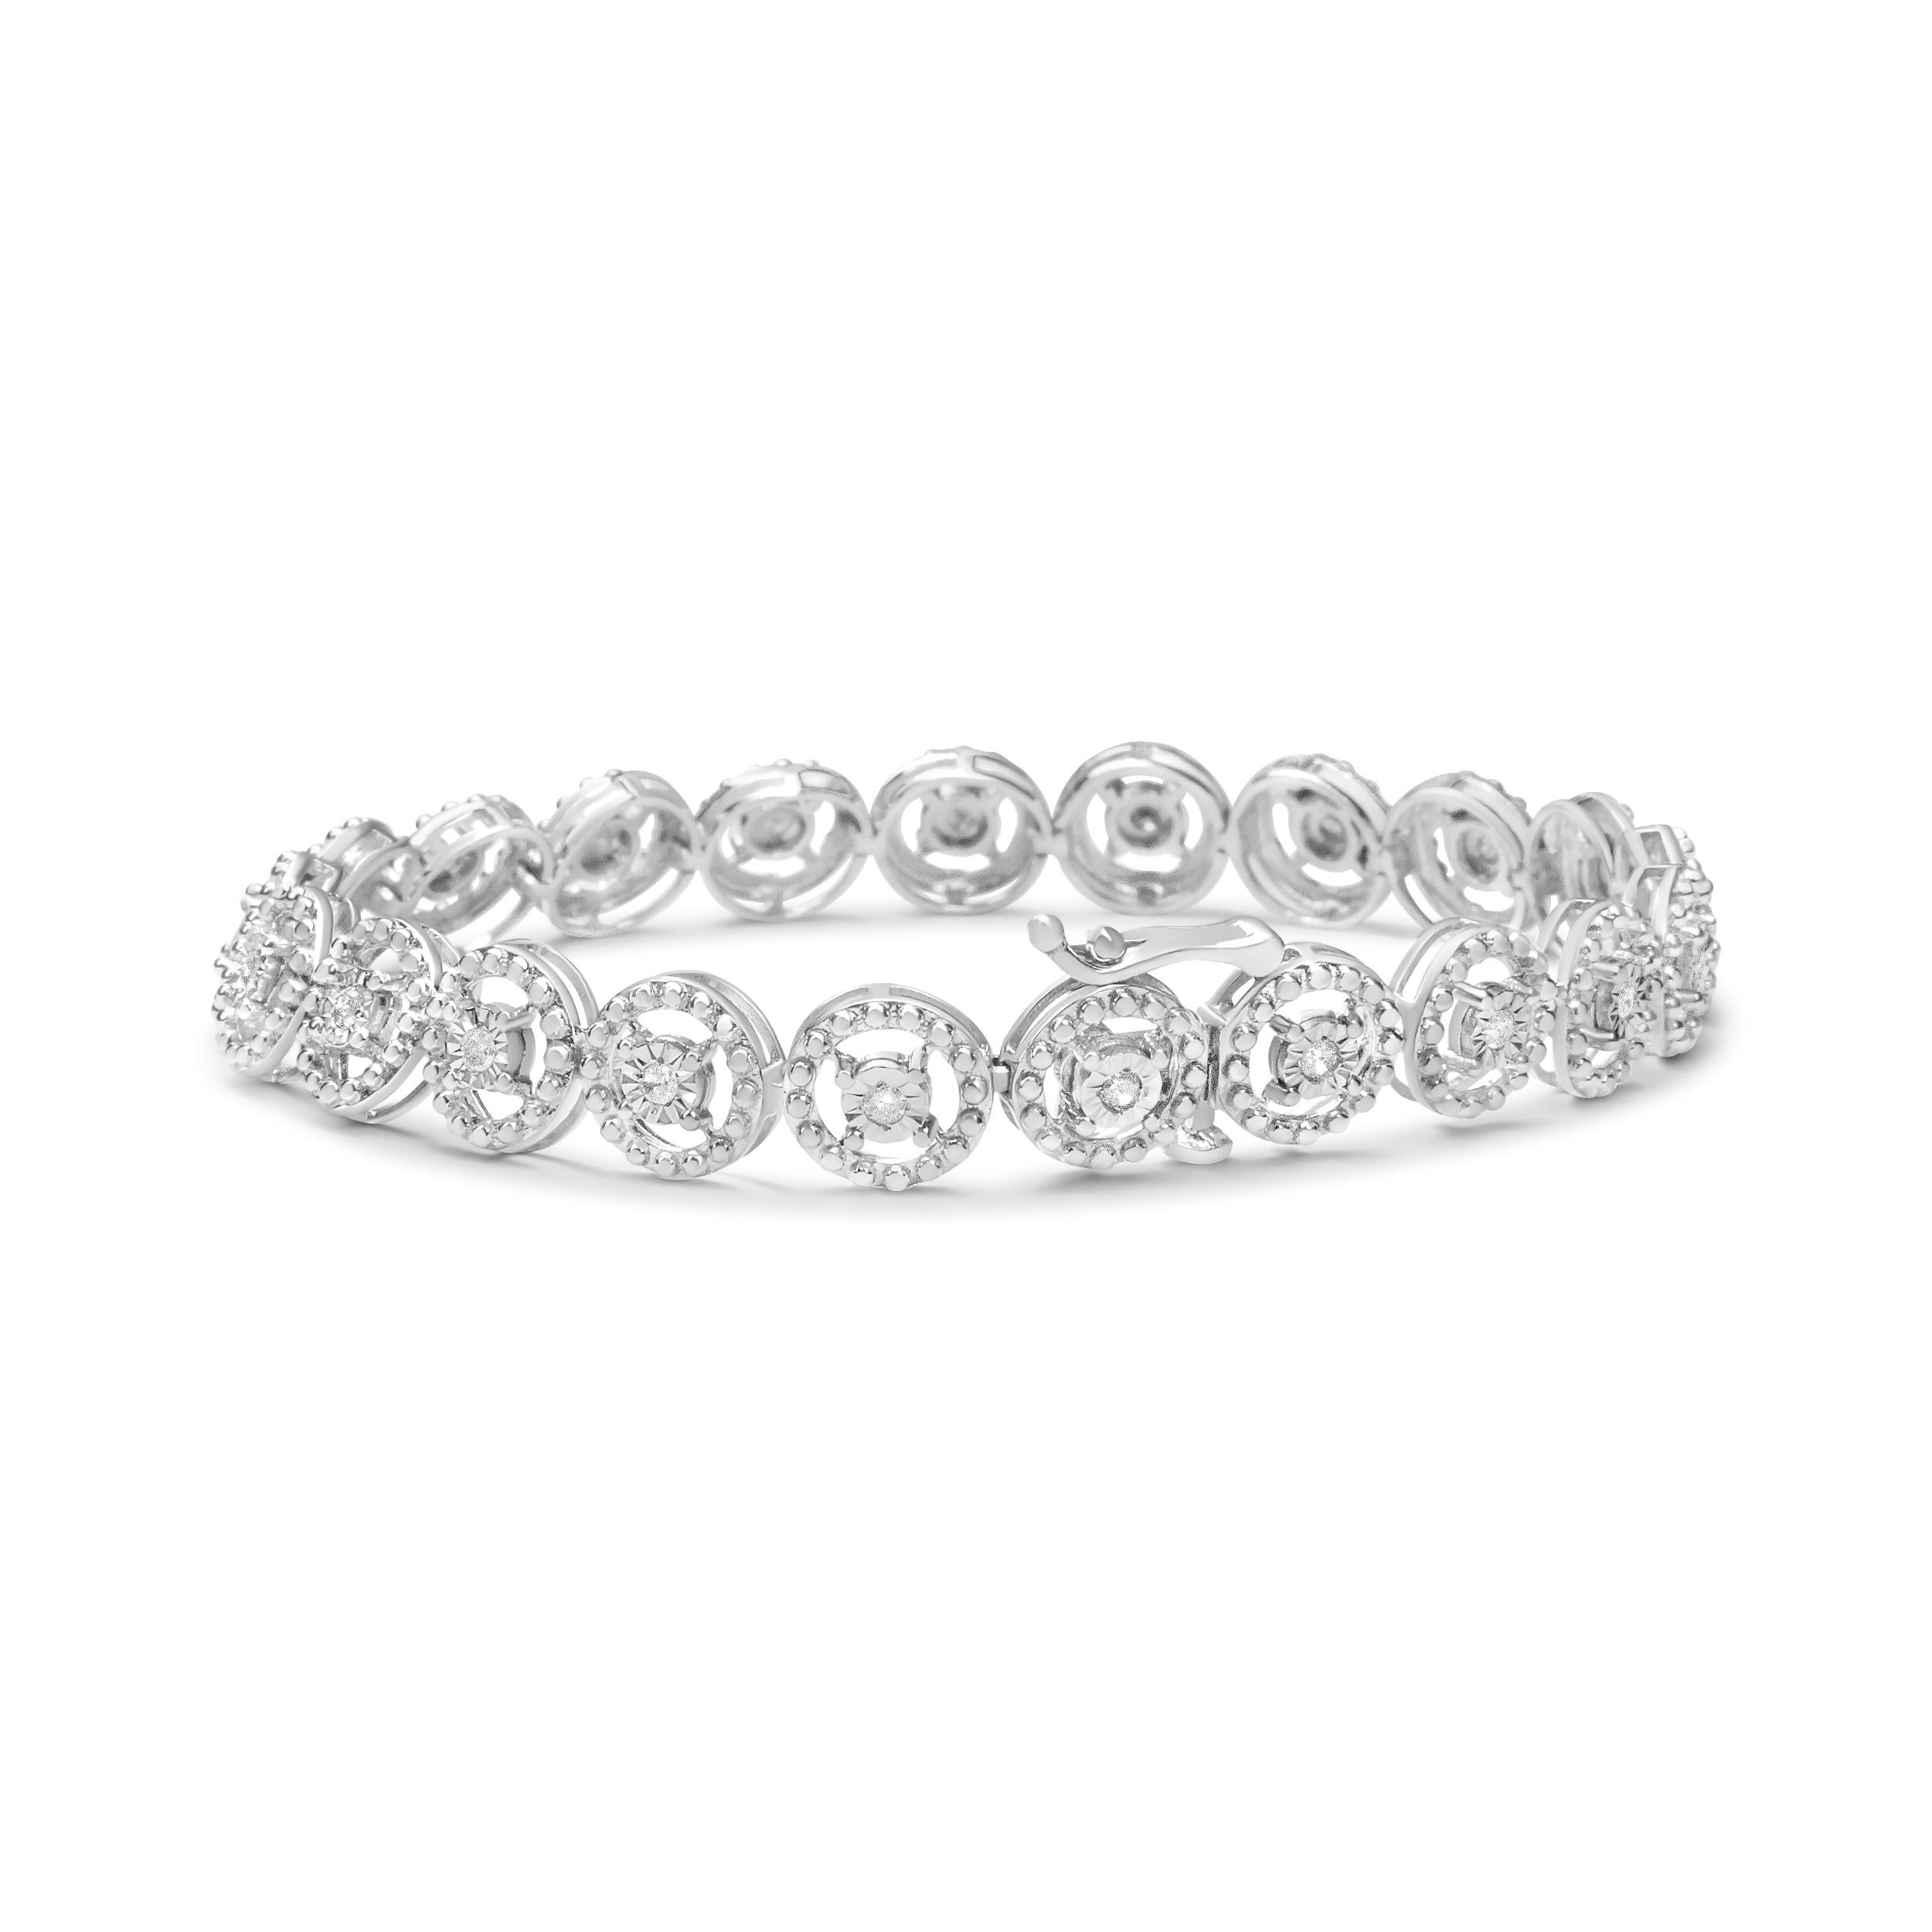 Elegant and timeless, this .925 sterling silver link bracelet features round, rose cut diamonds in a miracle plate setting, which centers each genuine diamond in a mirror-finish, high-polish frame, giving the illusion of a much larger stone. These